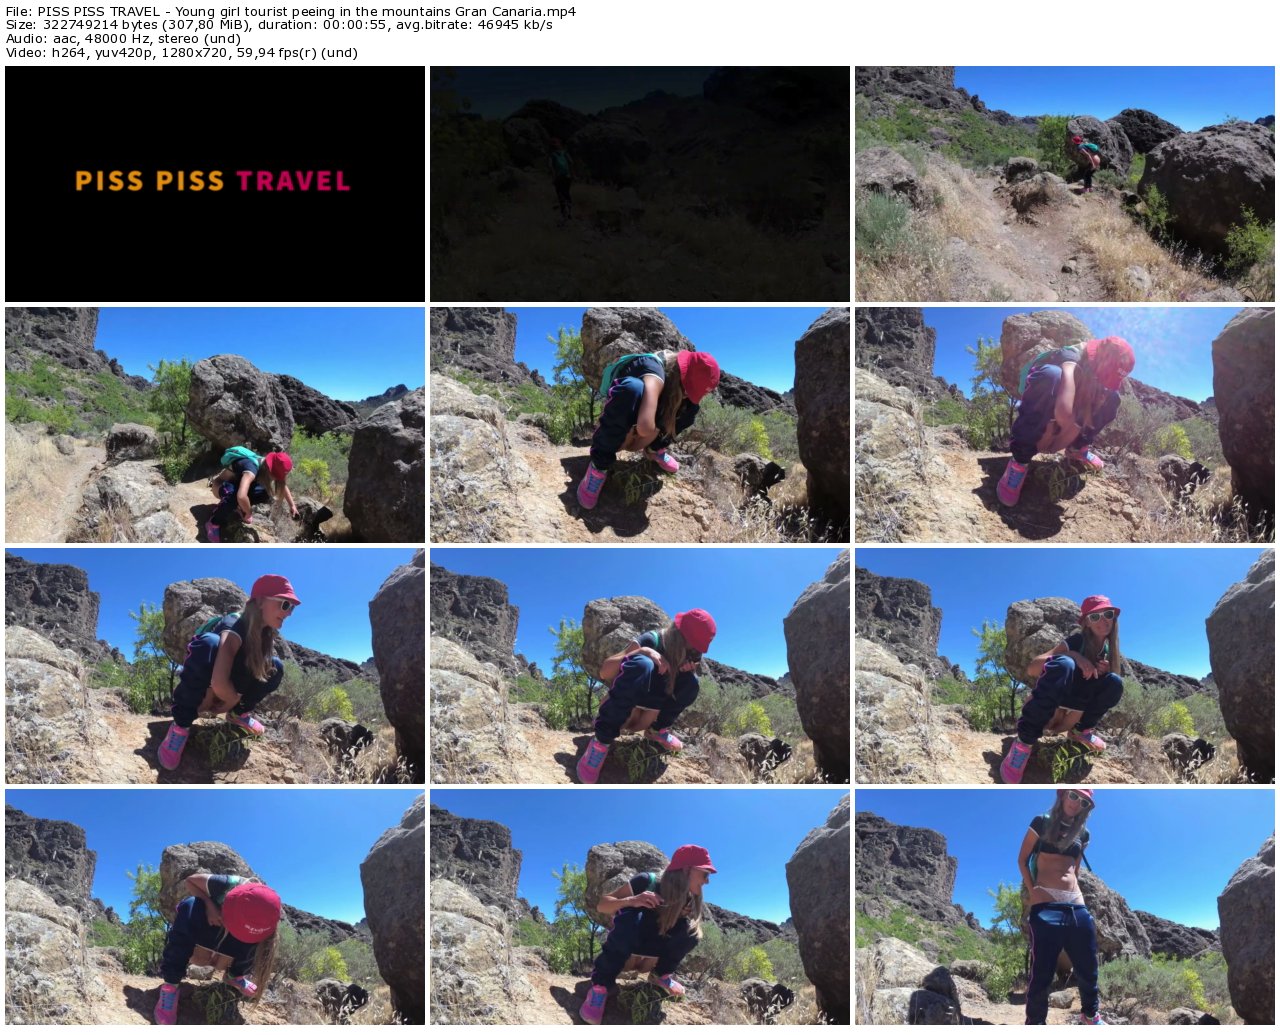 PISS PISS TRAVEL - Young girl tourist peeing in the mountains Gran Canaria_thumb.jpg